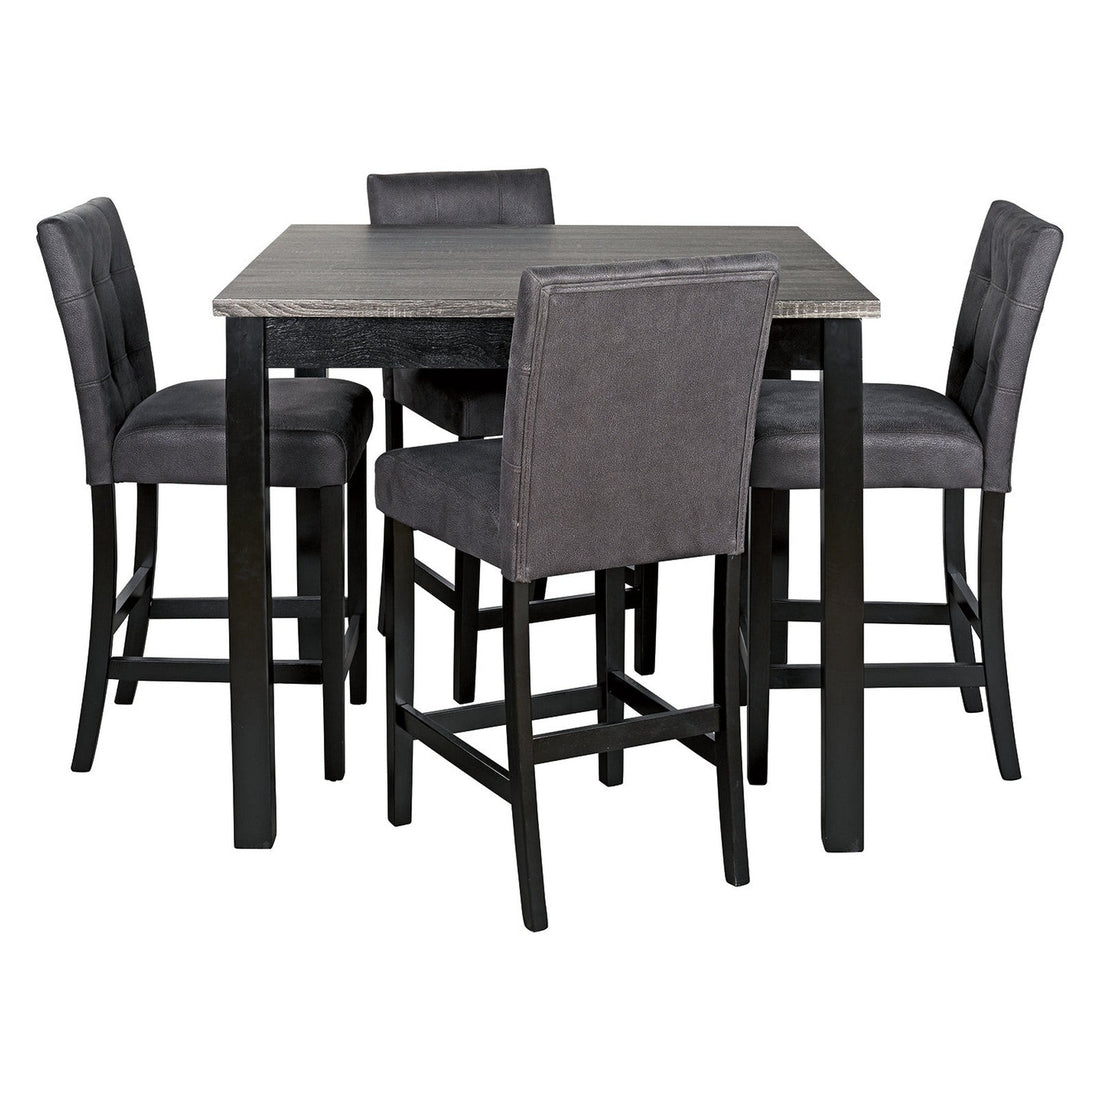 Garvine Counter Height Dining Table and Bar Stools (Set of 5) Ash-D161-223